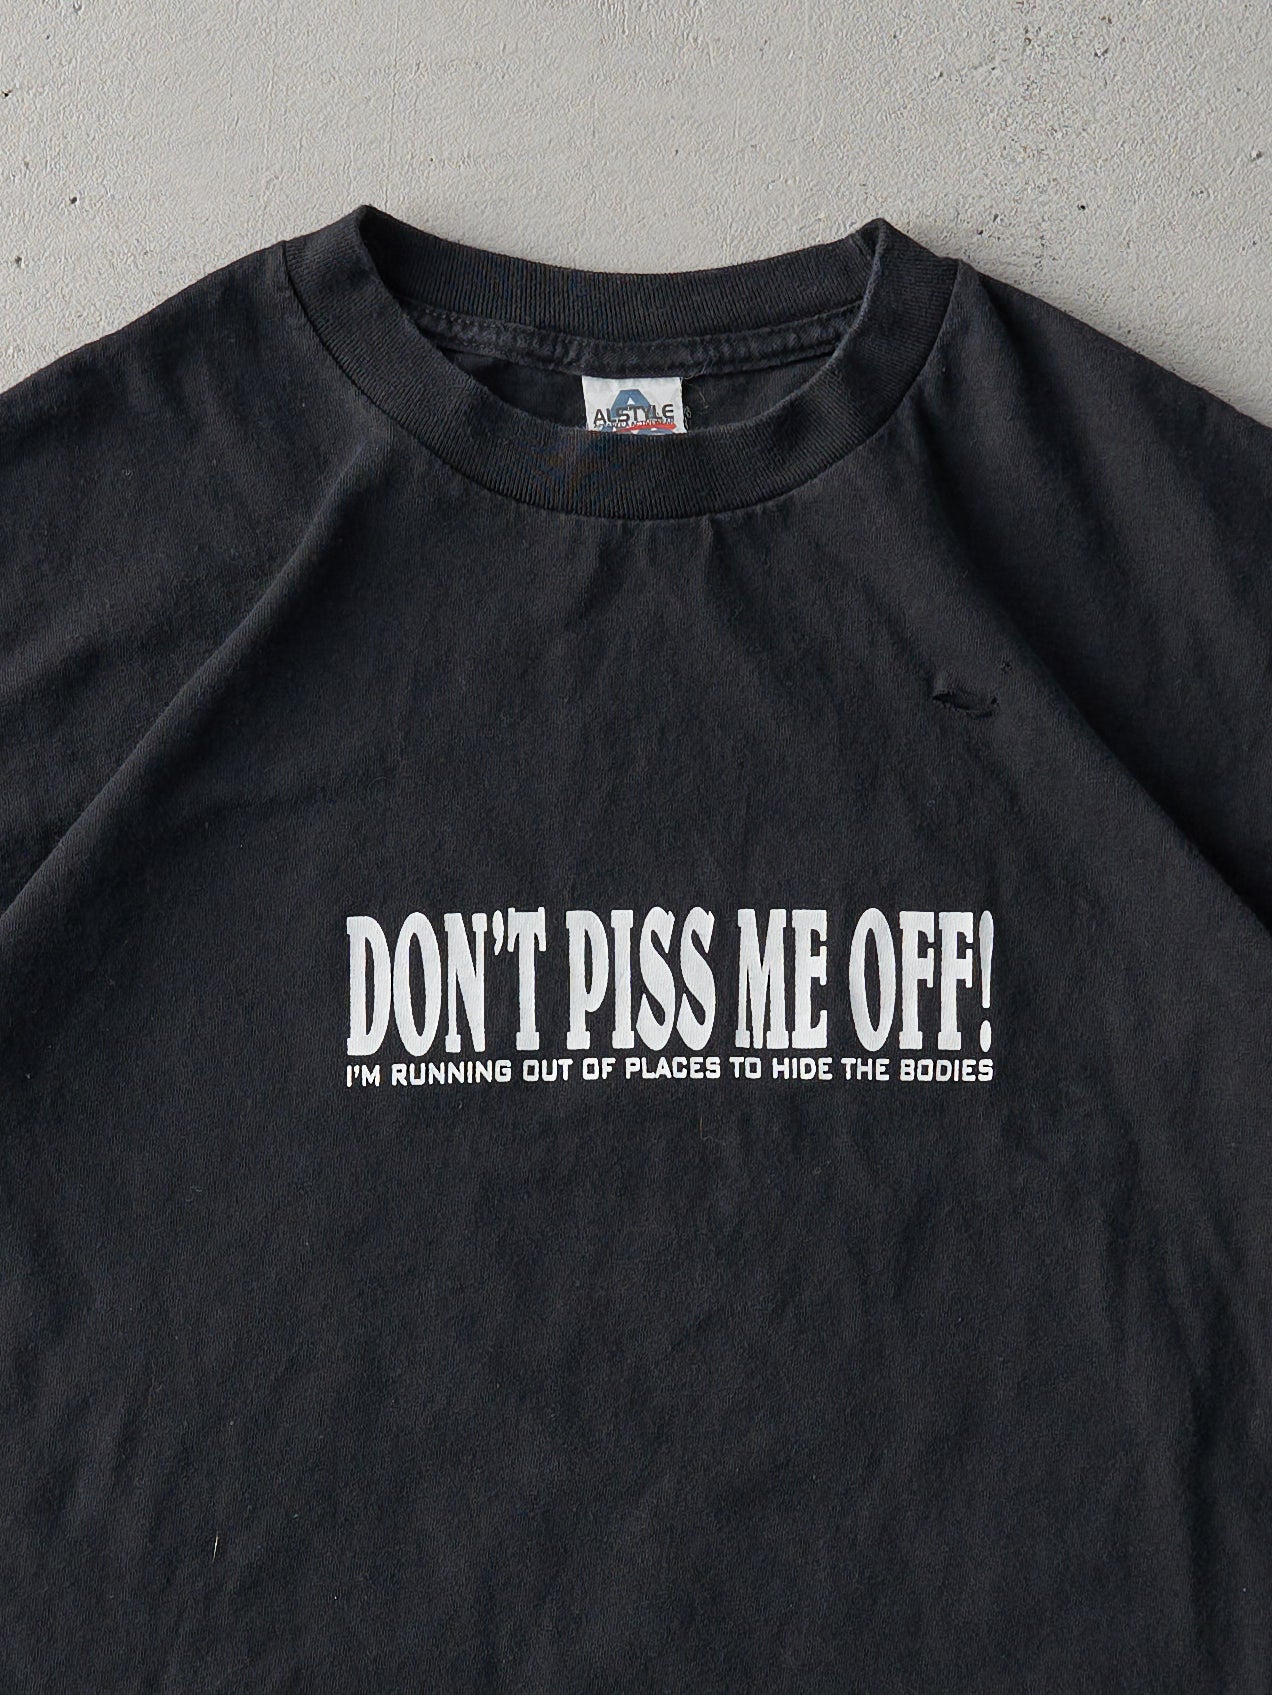 Vintage 90s Black "Don't Piss Me Off" Tee (S)